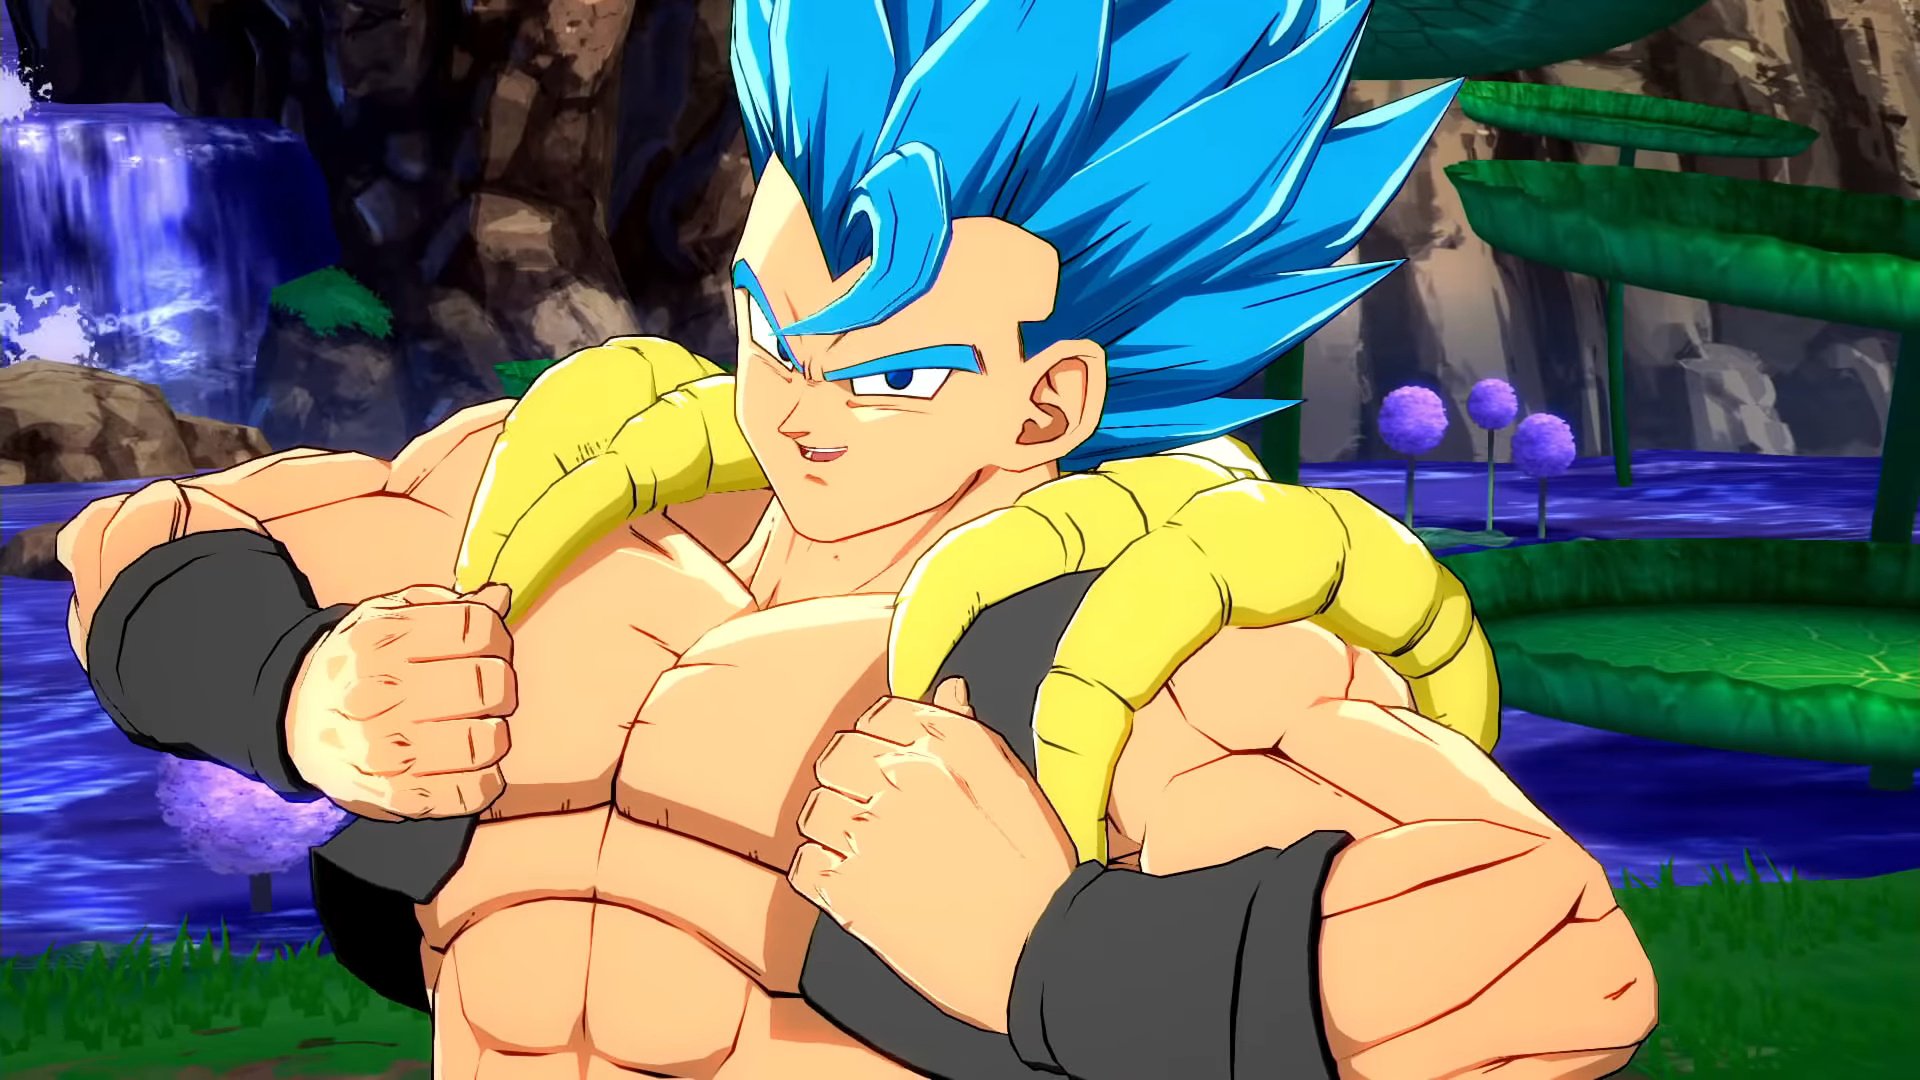 Gogeta The Powerful Fusion Warrior Joins The Battle In ...